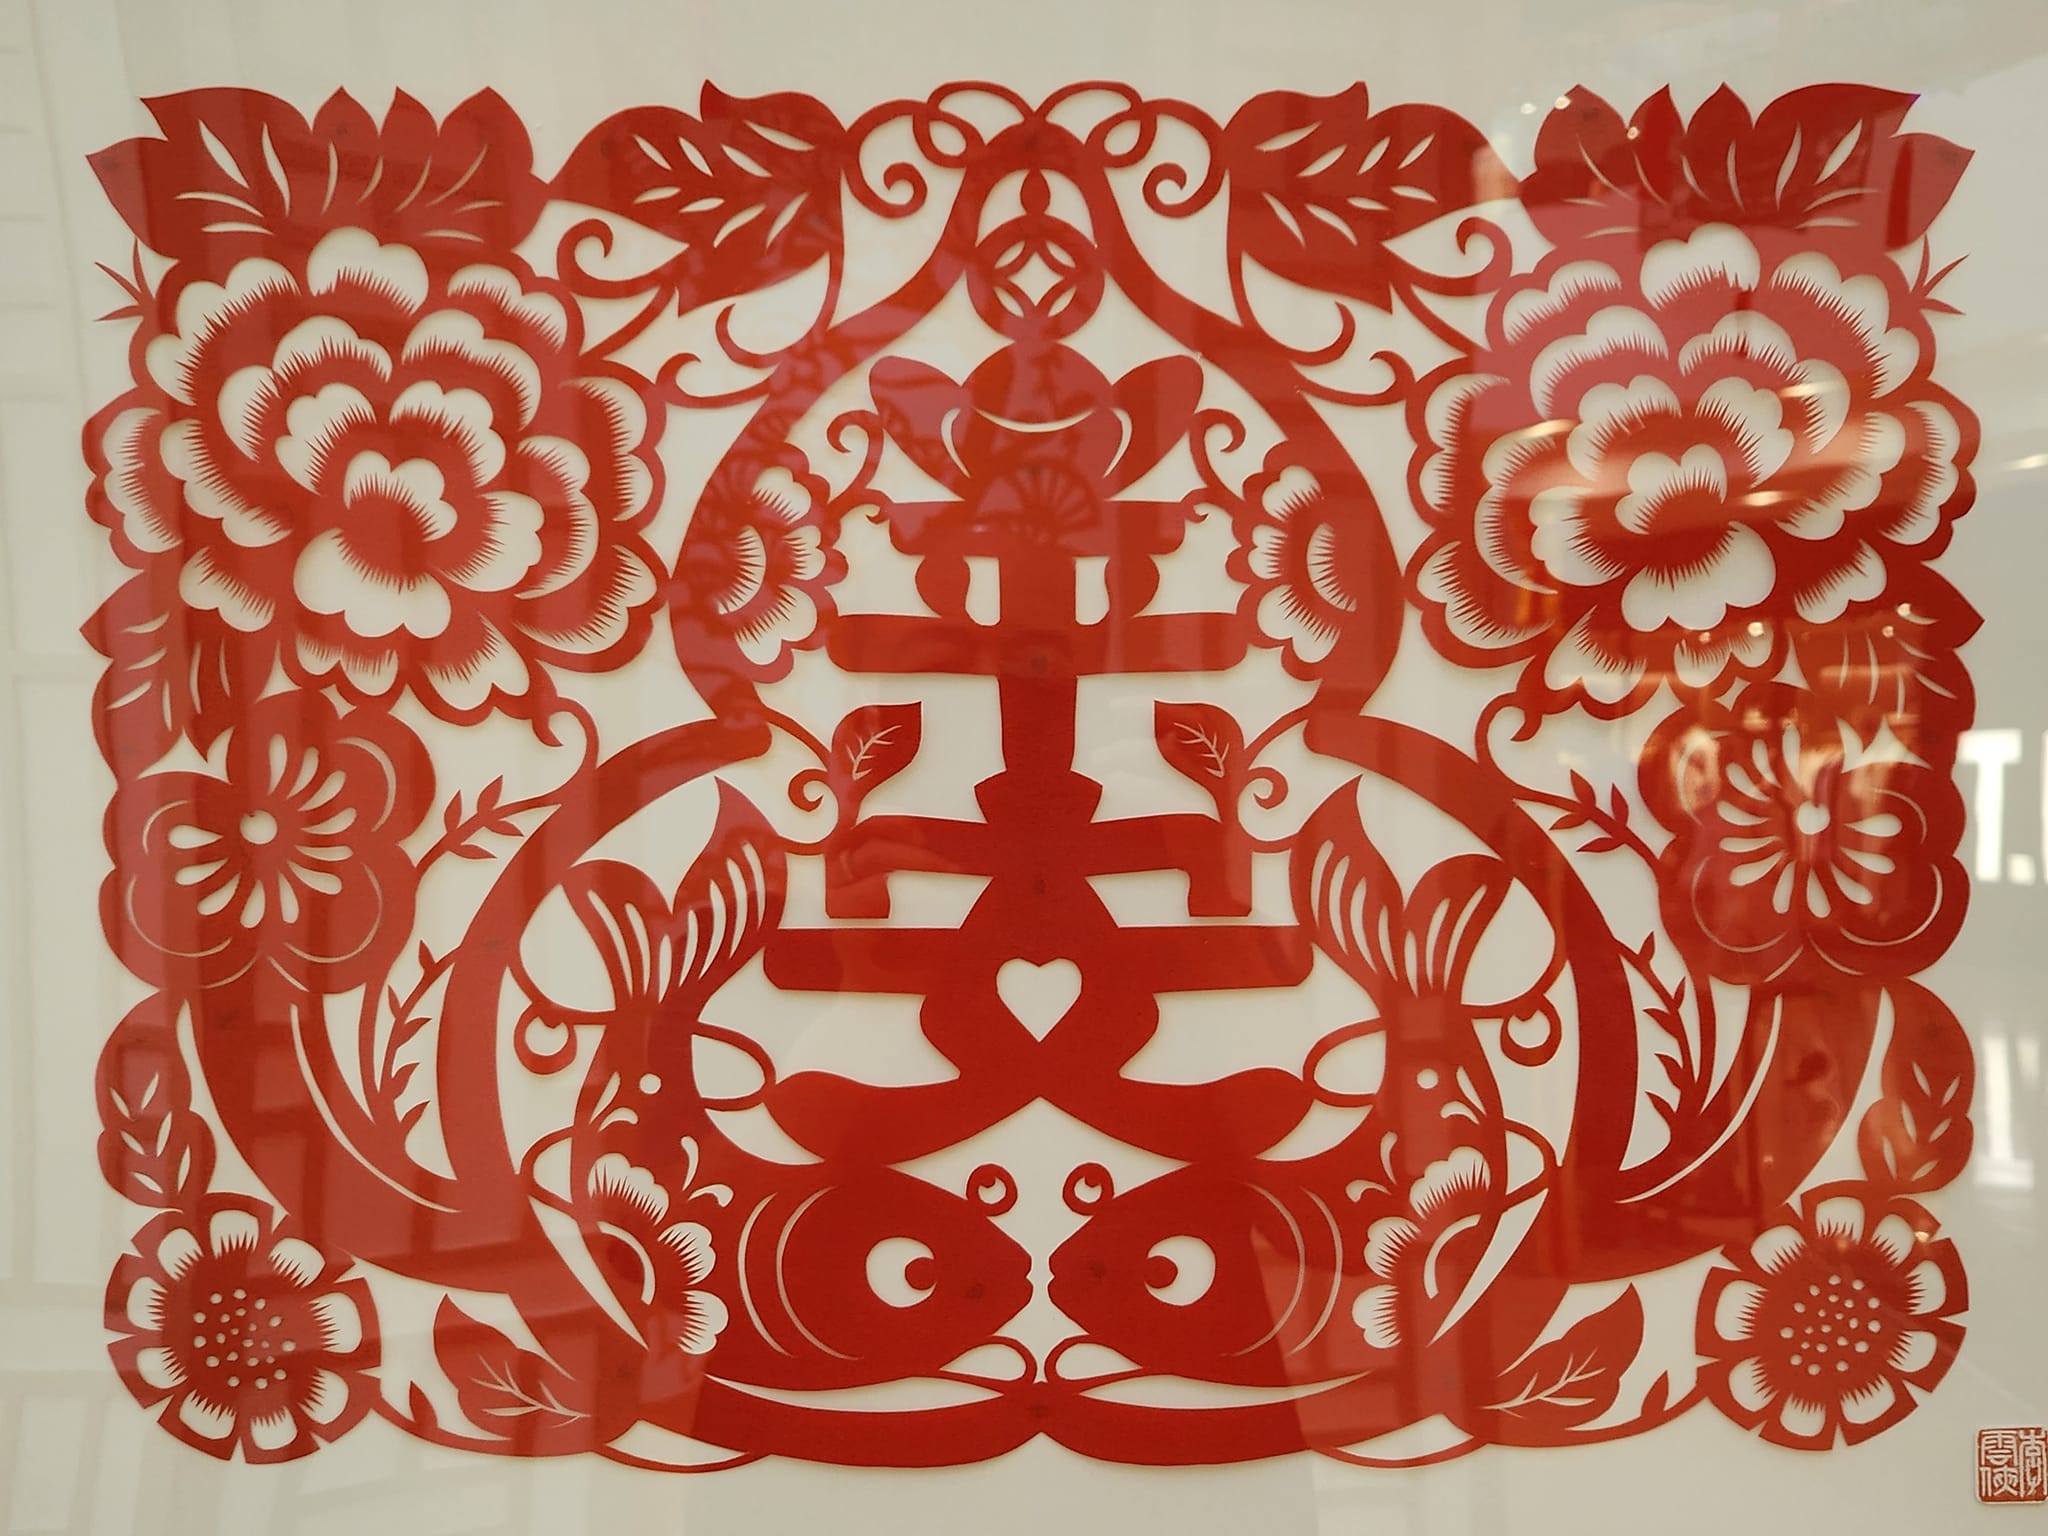 Paper Cutting Exhibition